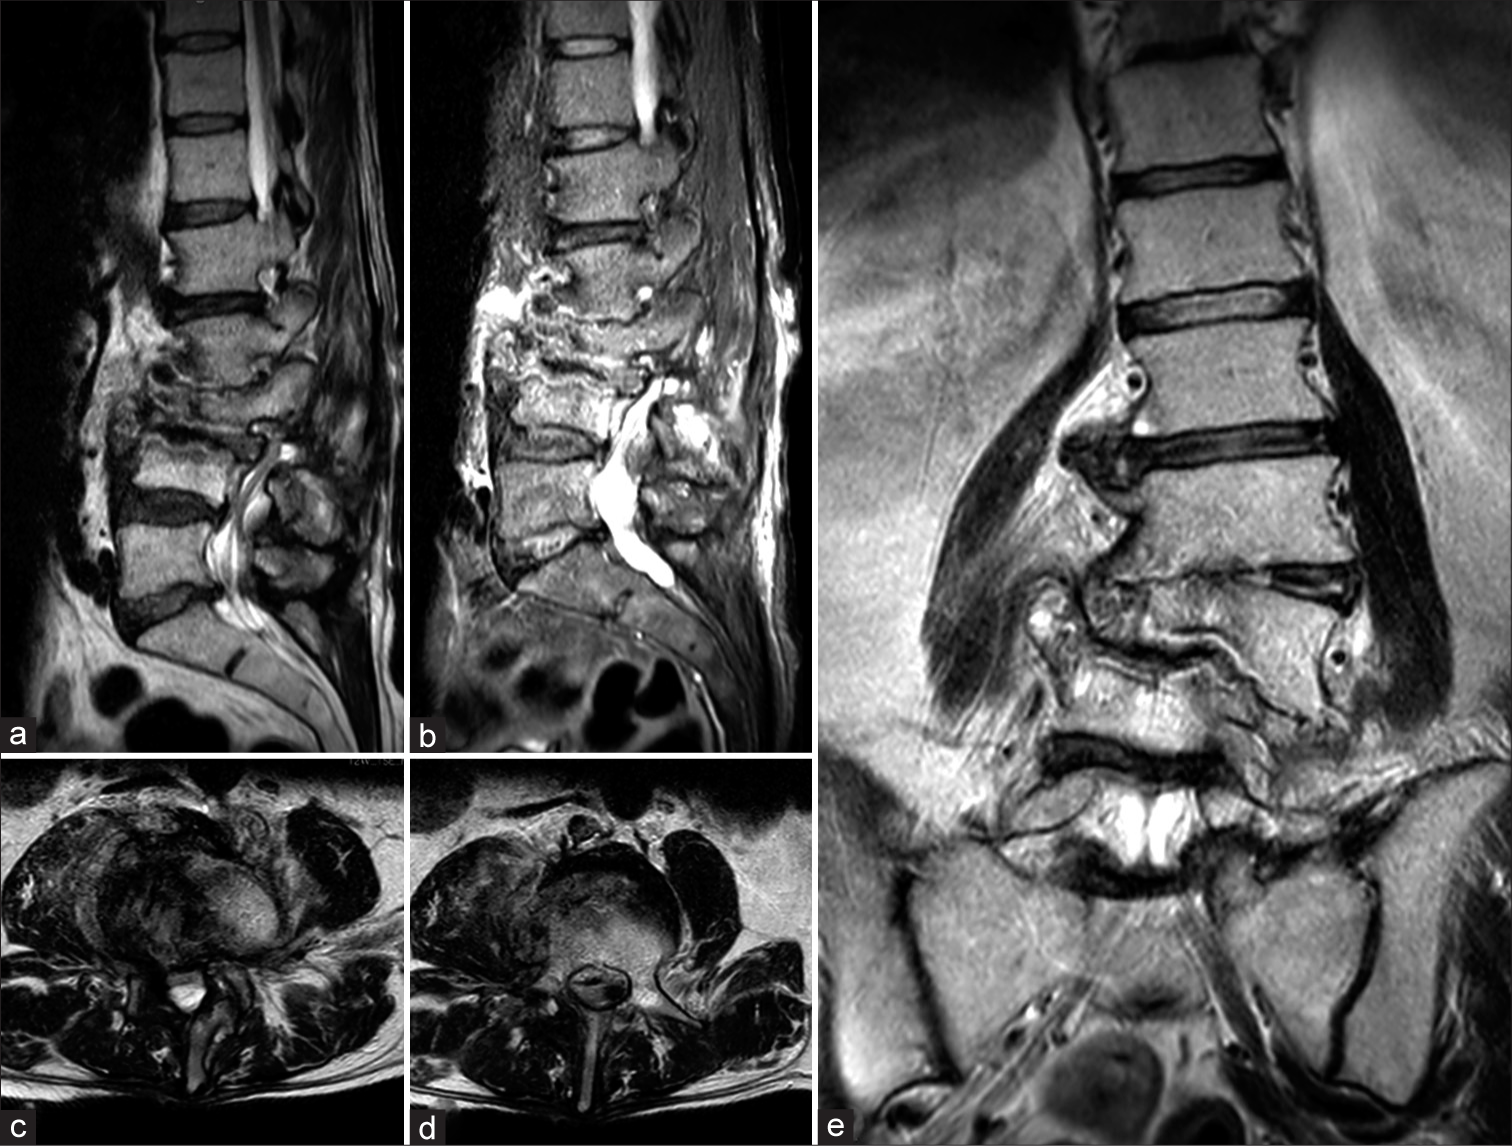 (a) Sagittal T2 and (b) short T1 inversion recovery (STIR)-weighted images showing hyperintensity of L2, L3, and L4 with alteration of vertebral bodies. (c and d) Axial T2-weighted images showing hyperintensity of the right iliopsoas and of the vertebral body of L4. (e) Coronal T2-weighted view showing L3 collapse with complete disruption of L2-L3 and L3-L4 discs.